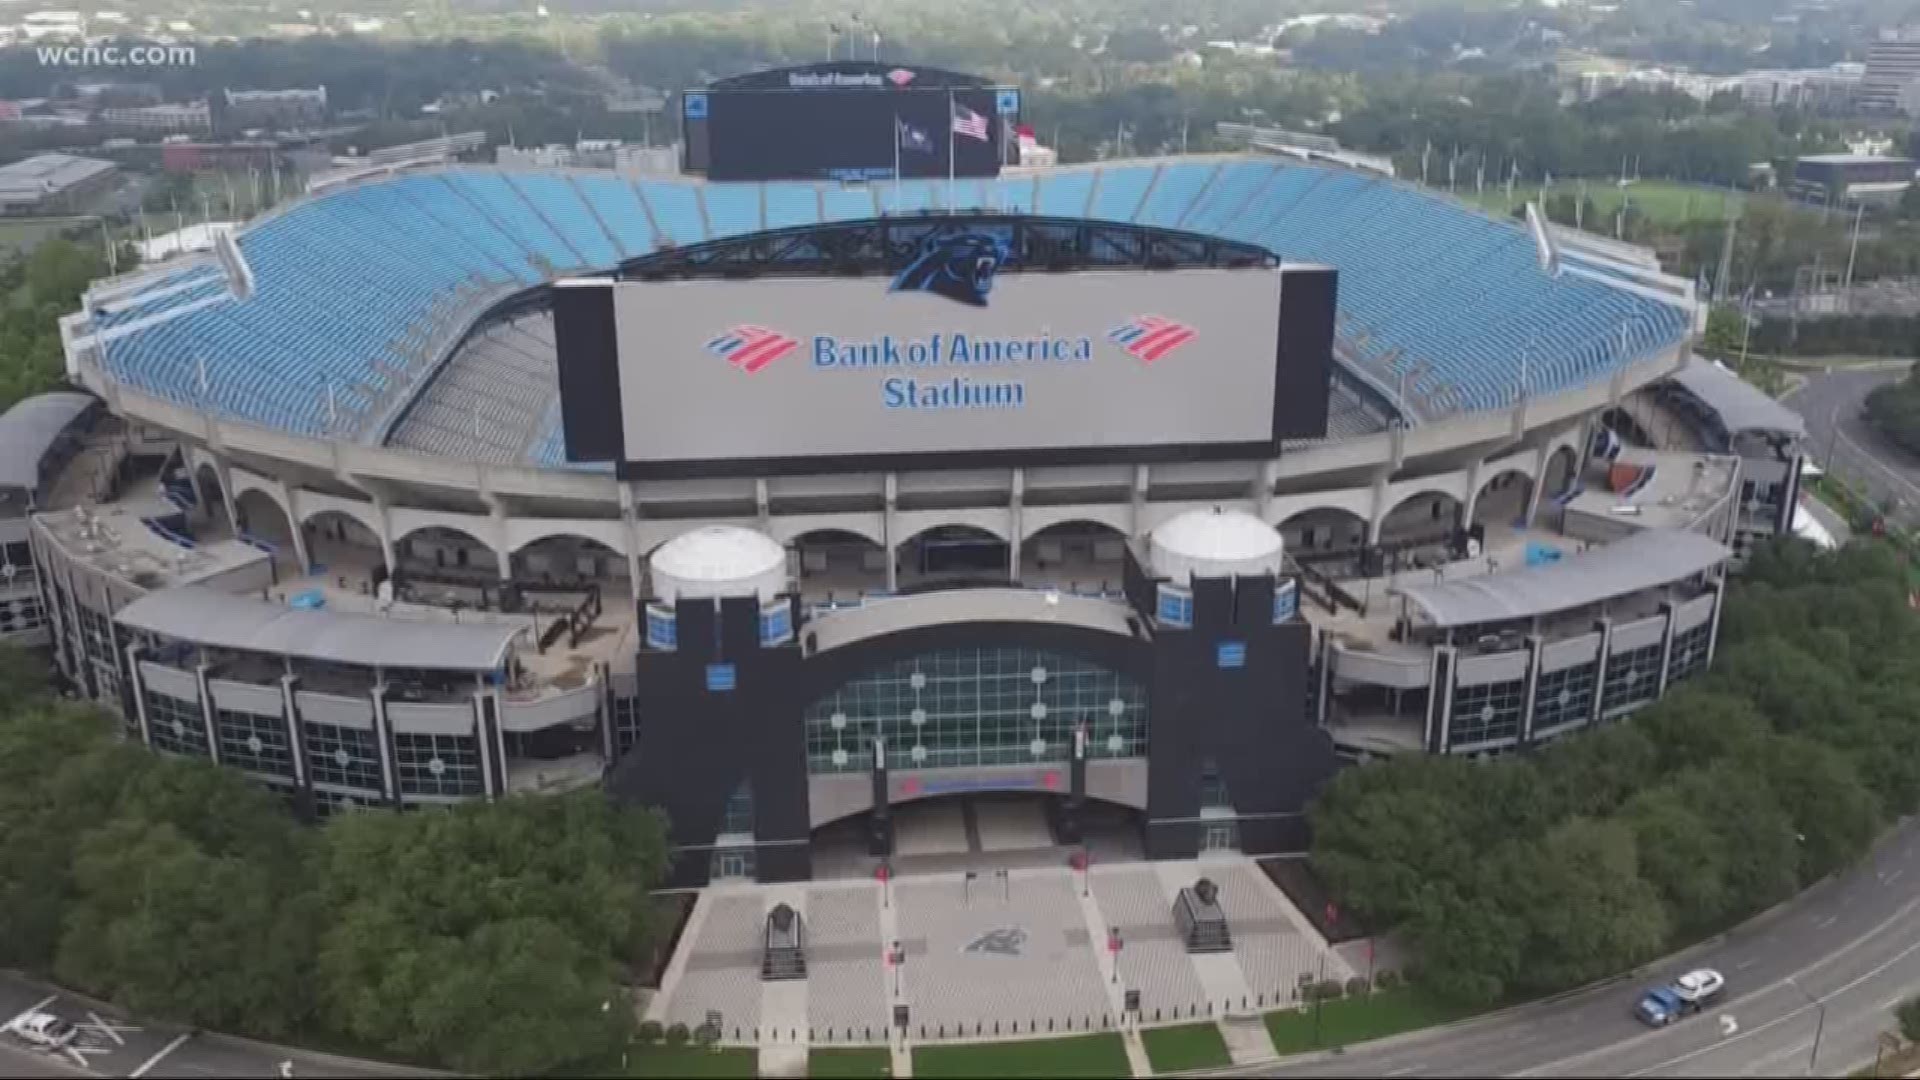 The Bank of America Stadium is now the 9th oldest stadium in the NFL. The question at hand is how much the big change would cost.